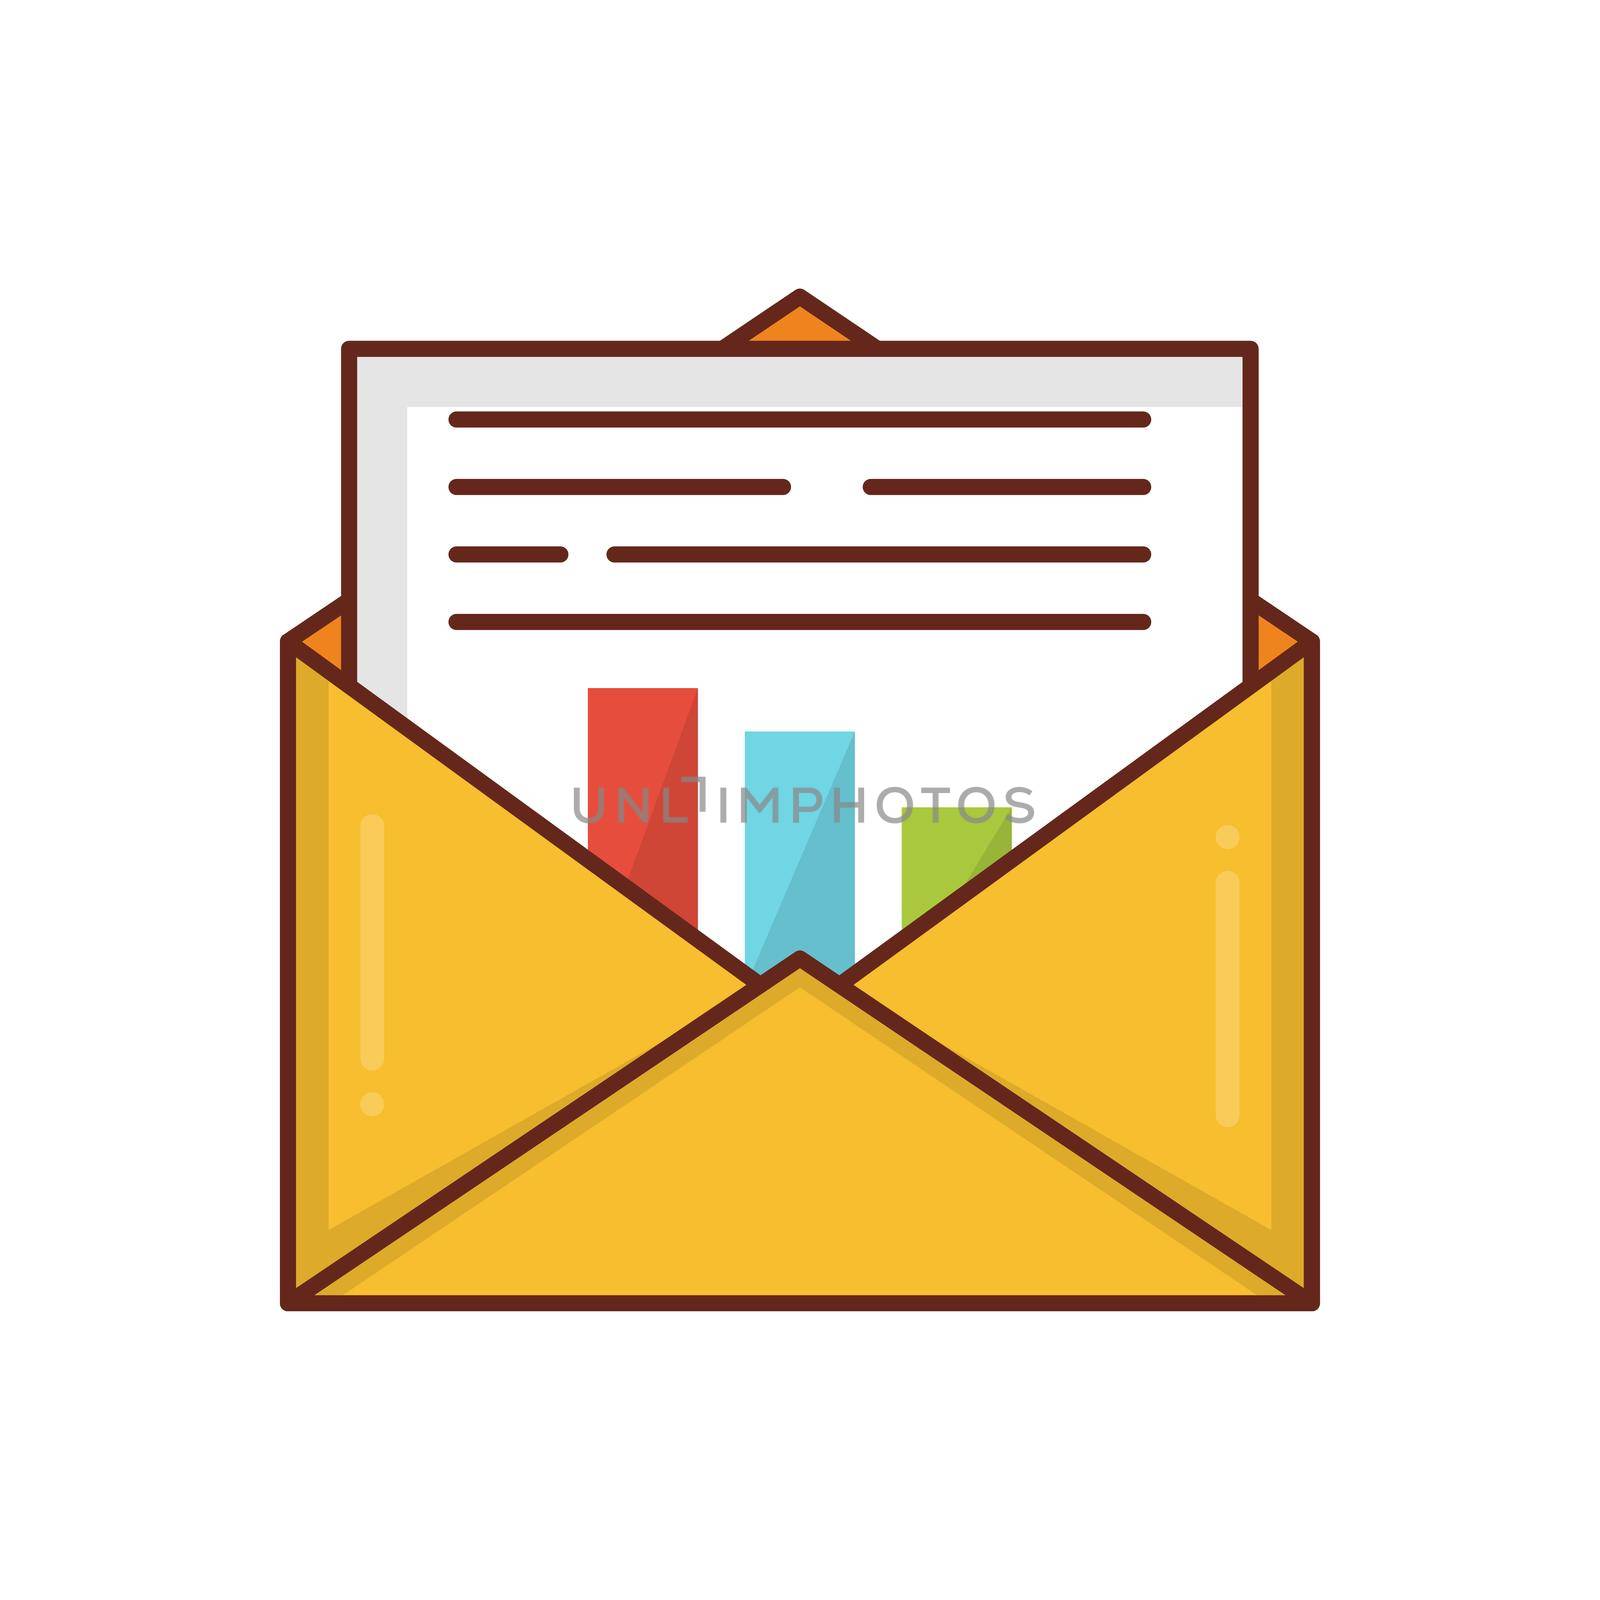 email vector flat color icon